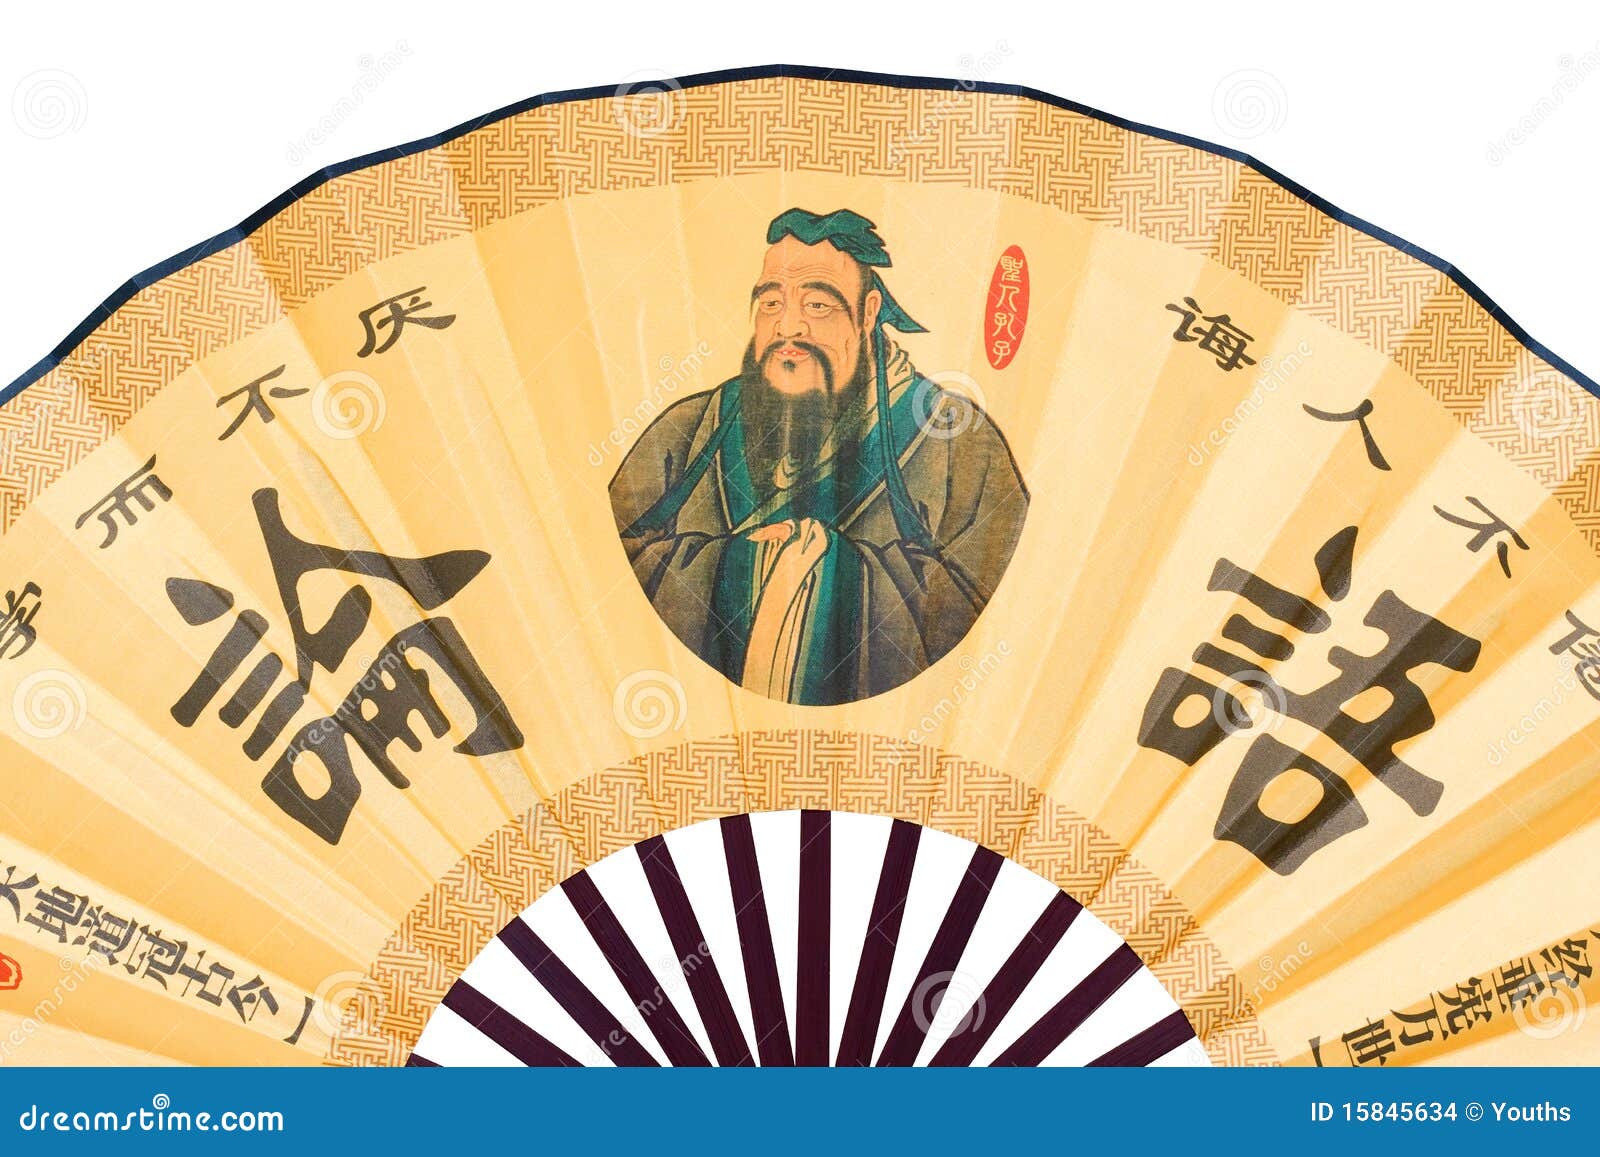 confucius portrait on chinese fan (clipping path!)